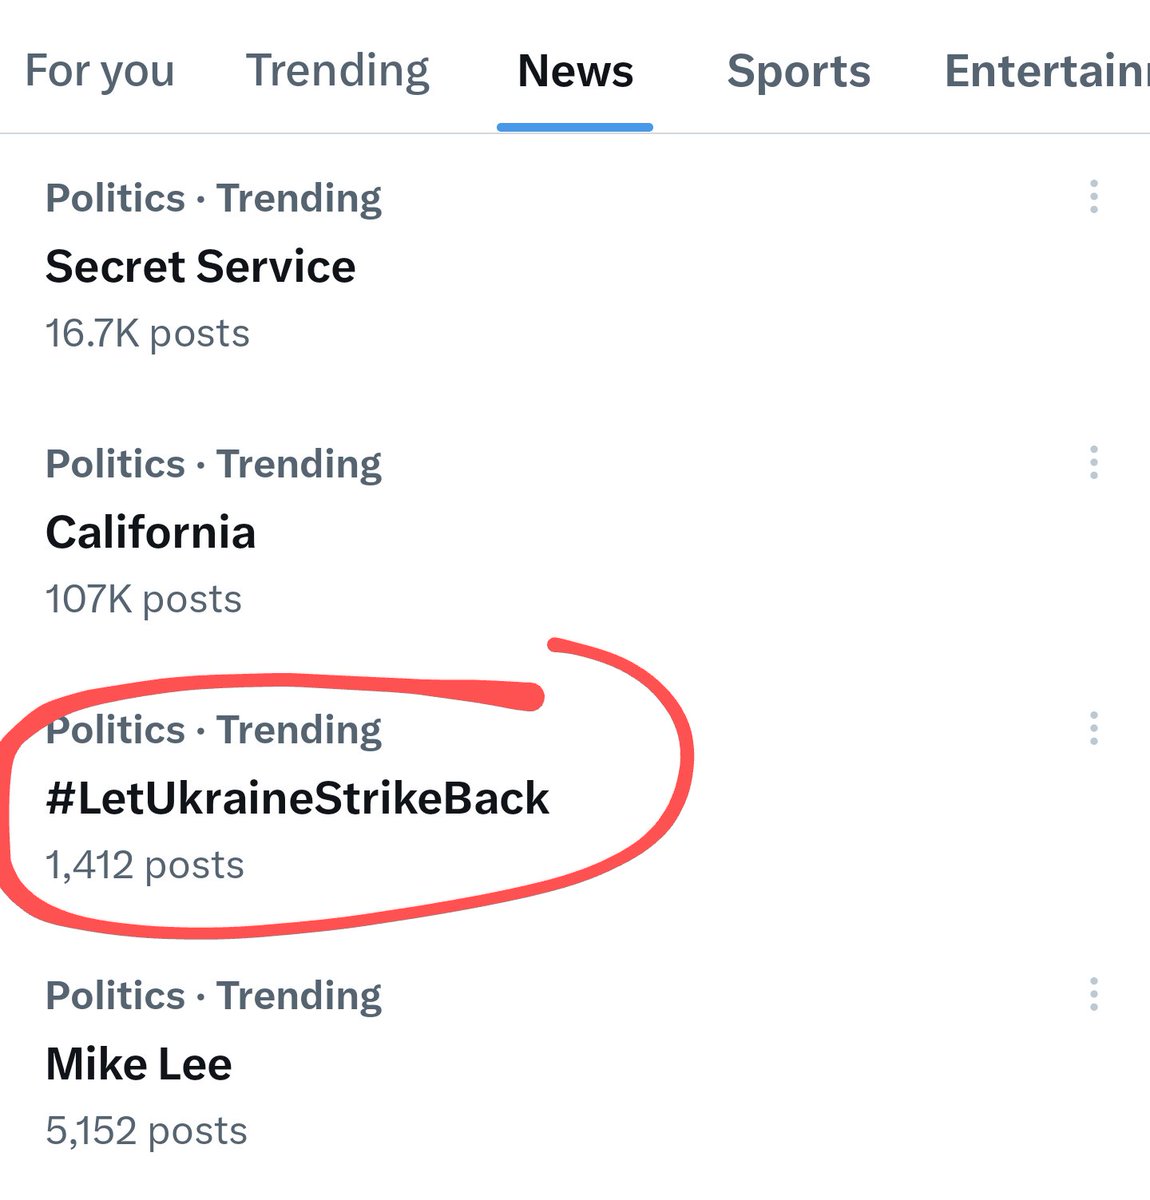 Rumors circulating that the Biden administration is debating allowing Ukraine to strike back at targets in Russia. MORE PRESSURE NEEDED NOW! #LetUkraineStrikeBack trended briefly yesterday. What do you think, fellas - can we smash this number today?